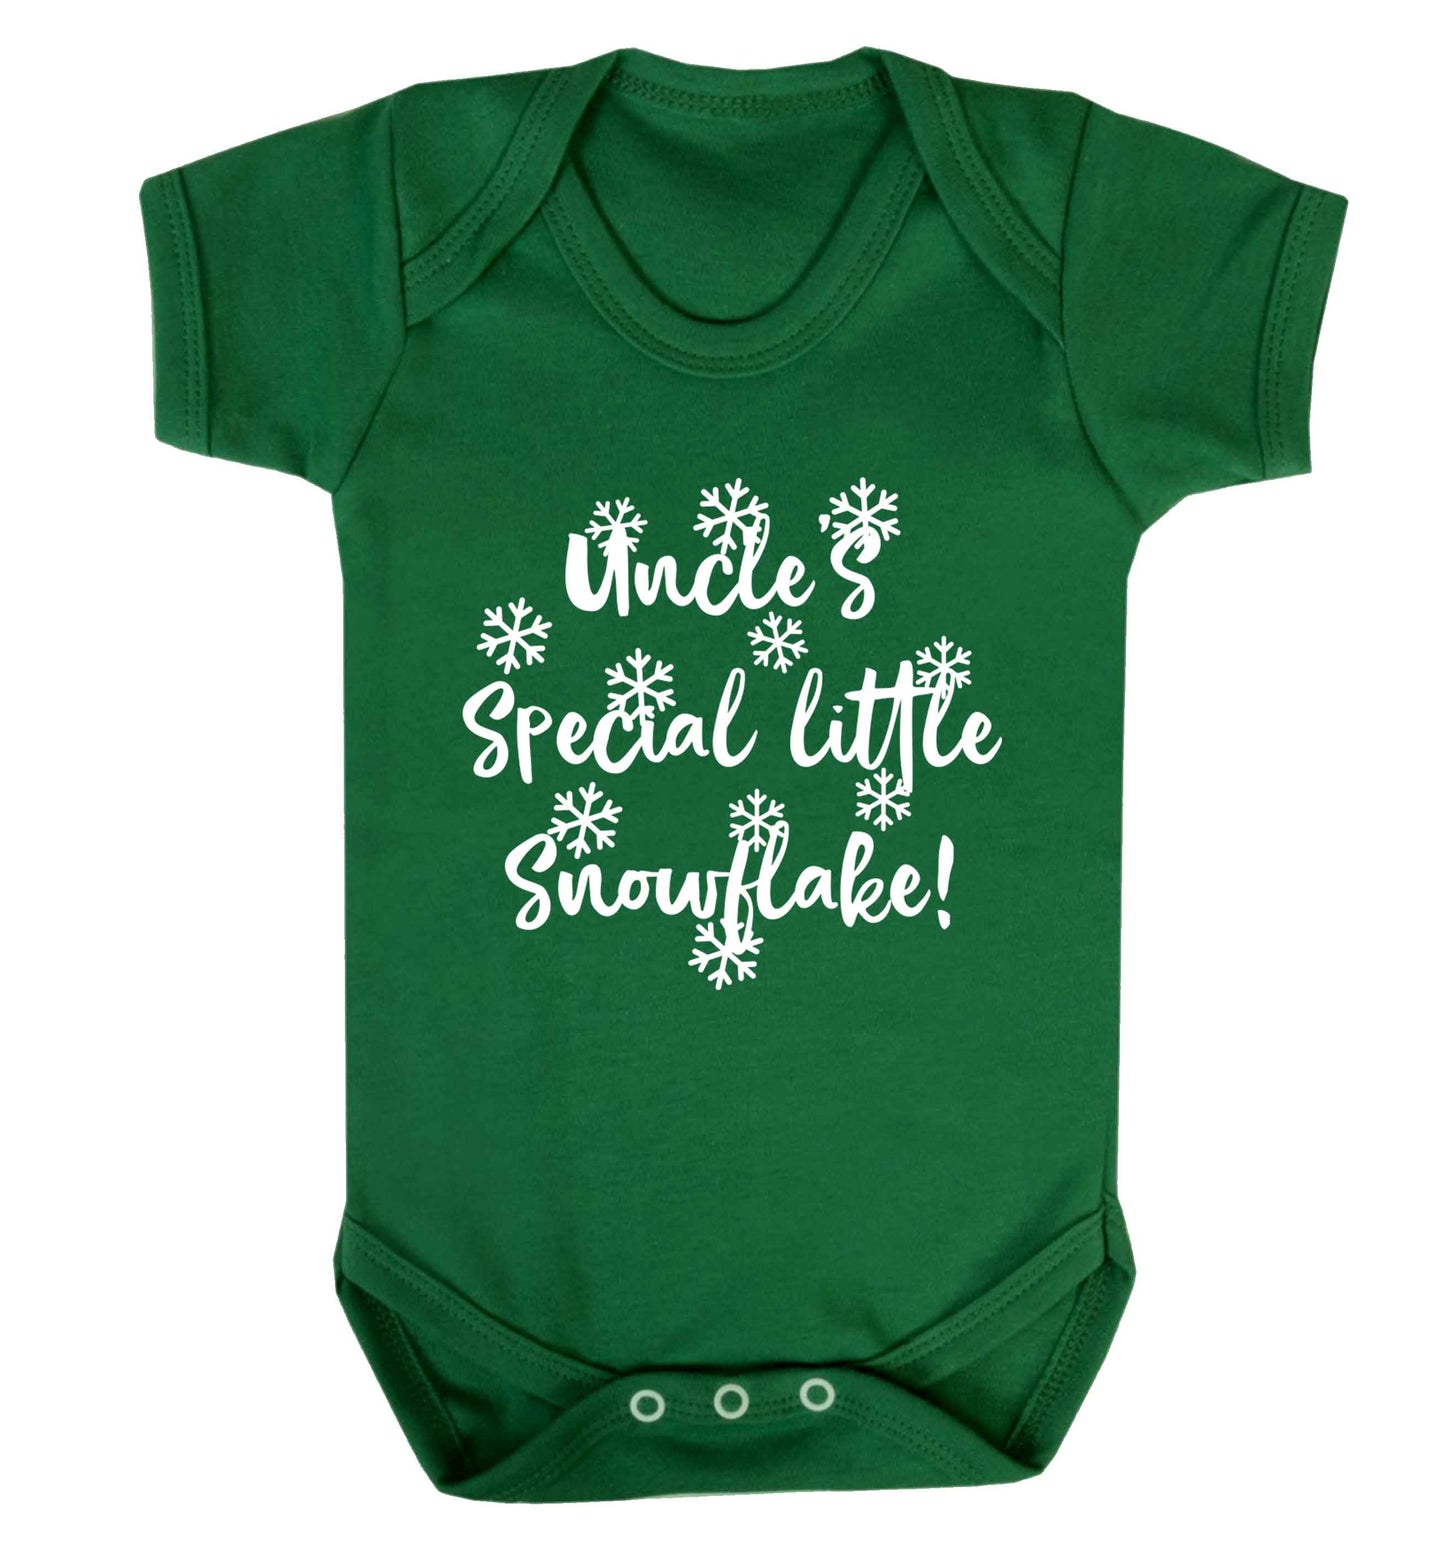 Uncle's special little snowflake Baby Vest green 18-24 months